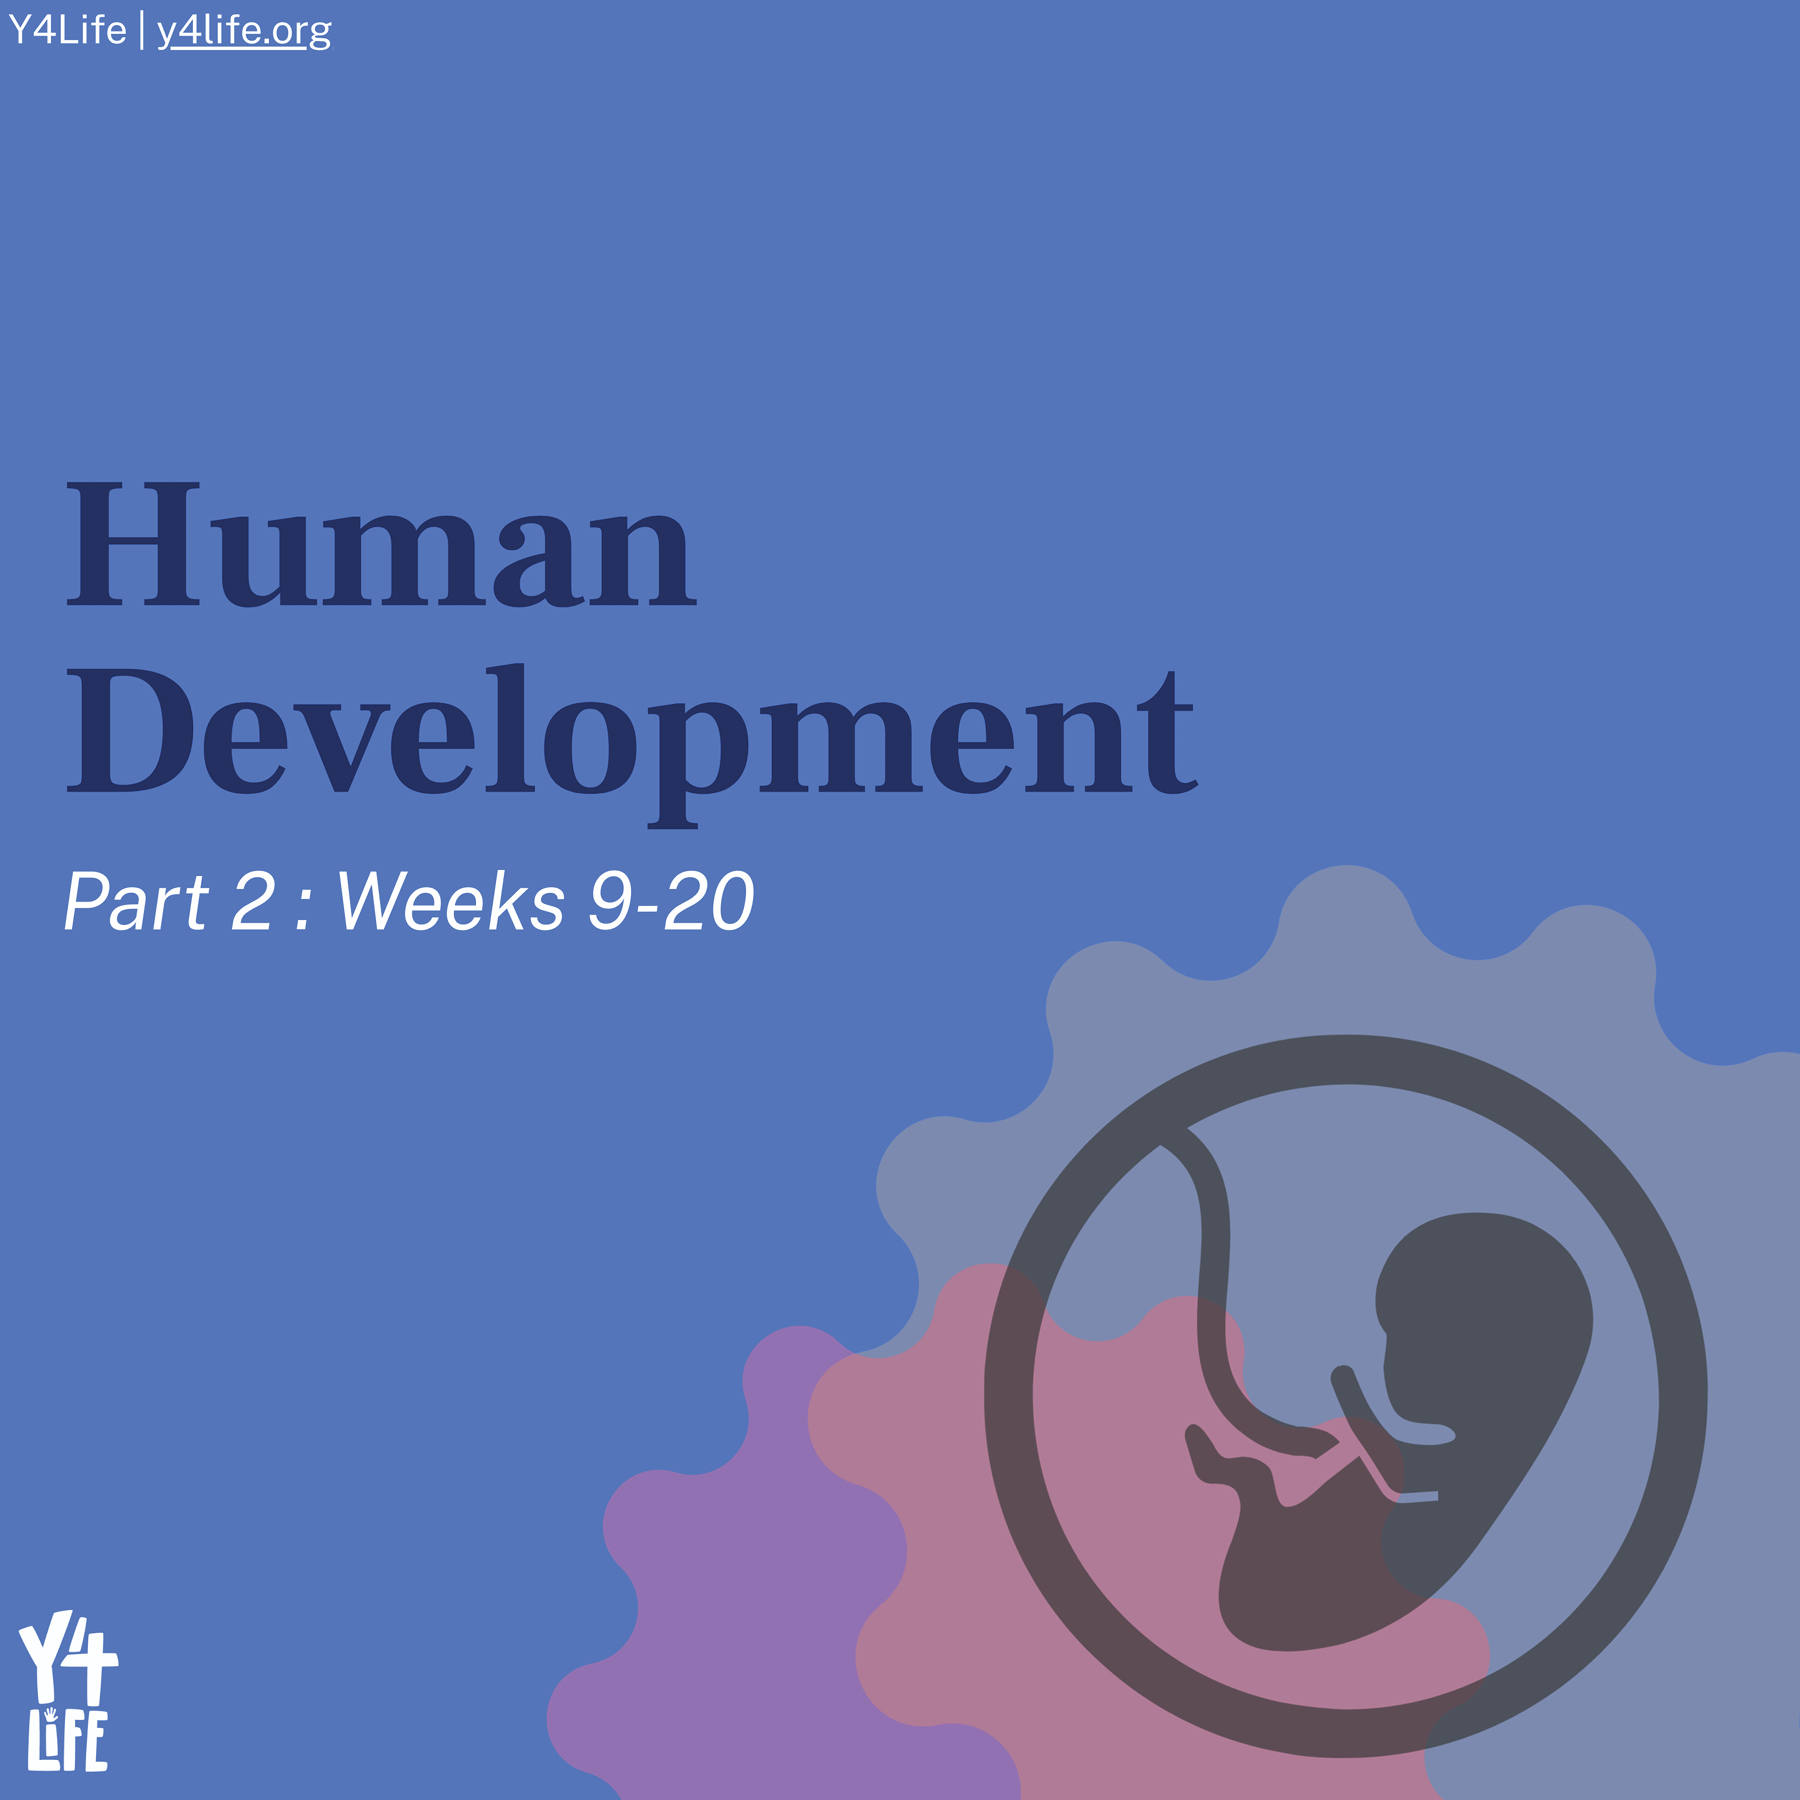 Human Development | Part 2: Weeks 9-20 - A Y4Life Infographic Booklet